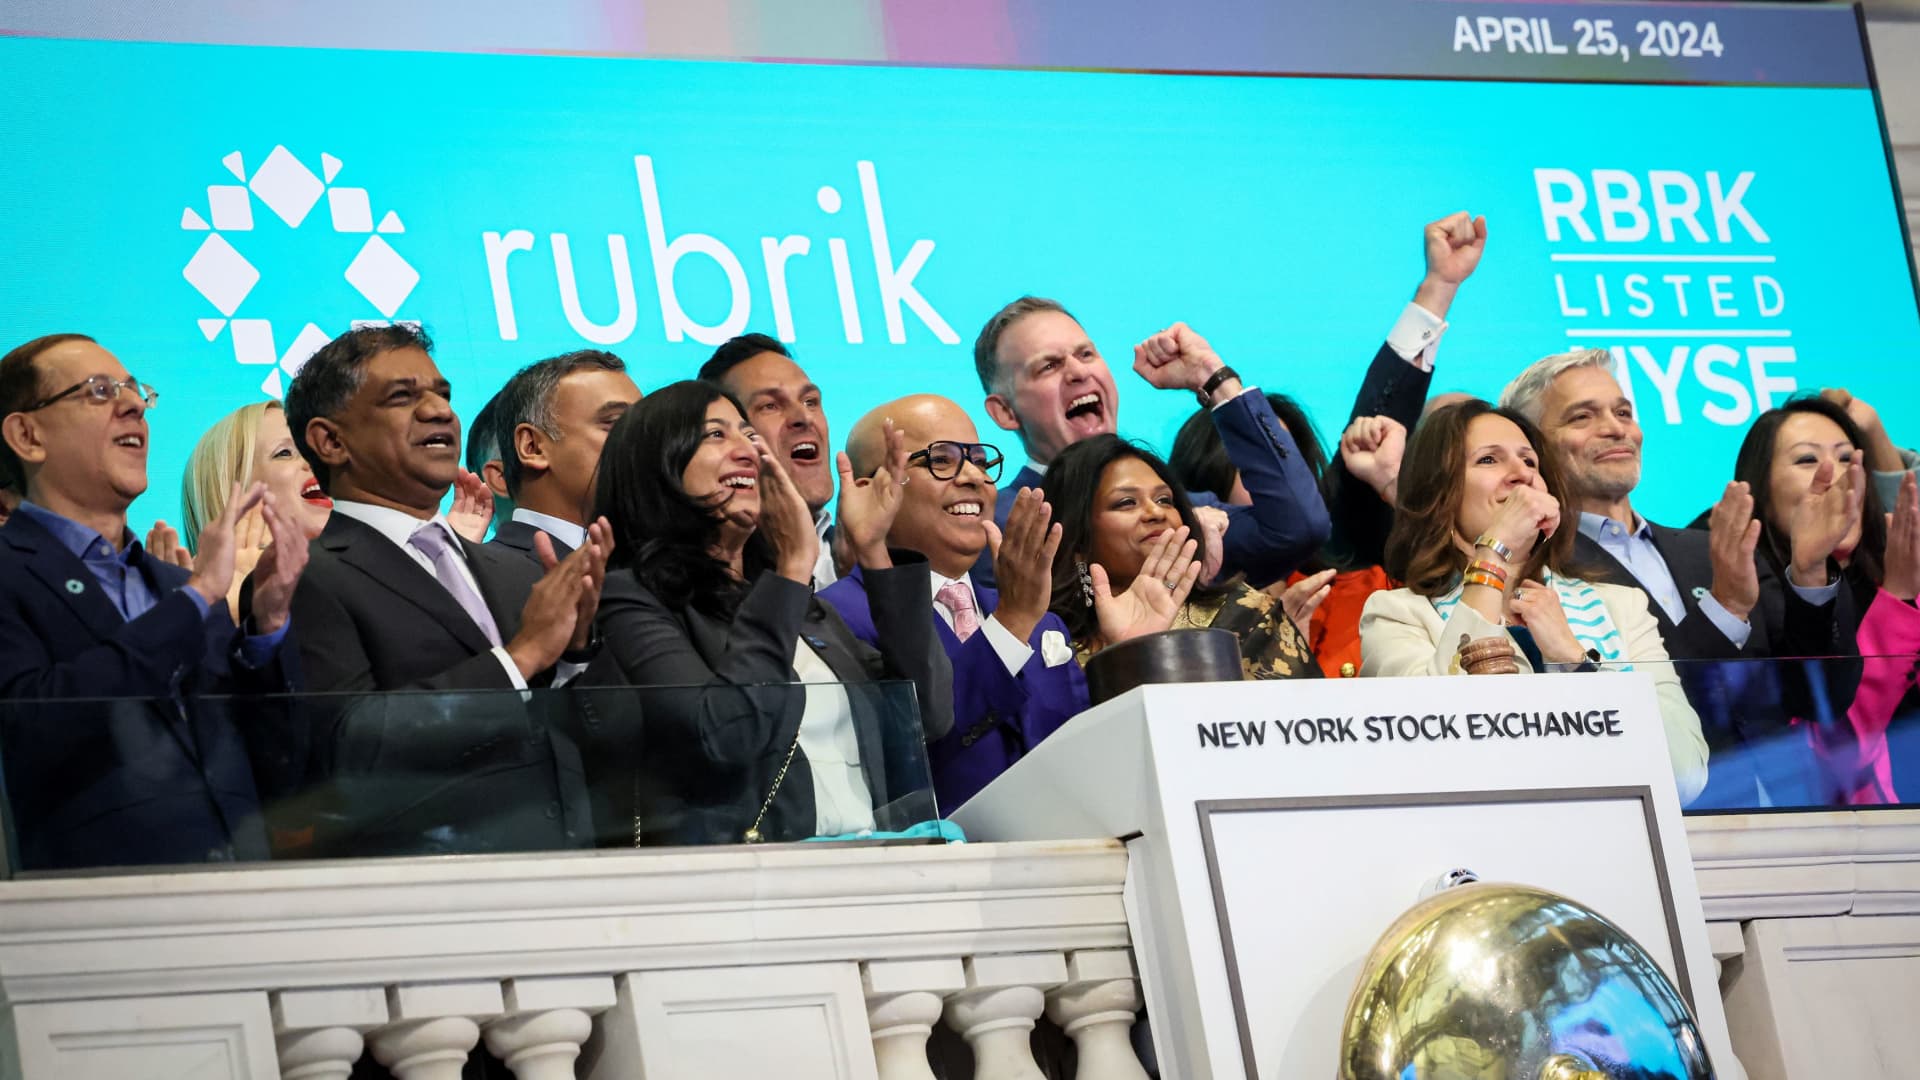 Rubrik stock pops 20% in NYSE debut after firm costs IPO above range